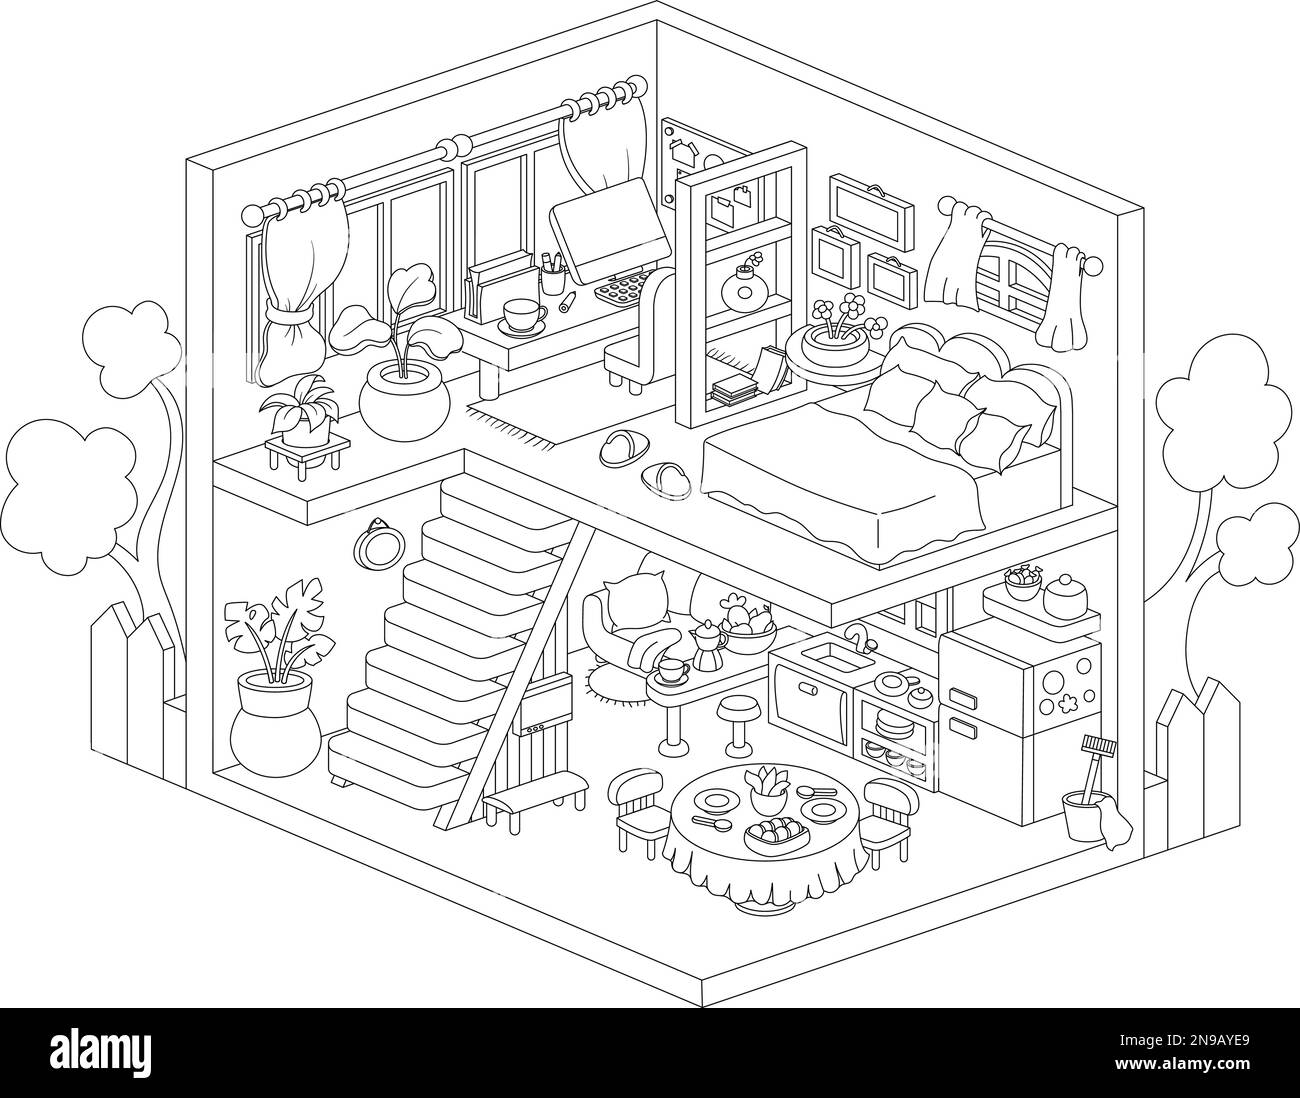 House drawing kids black and white stock photos images